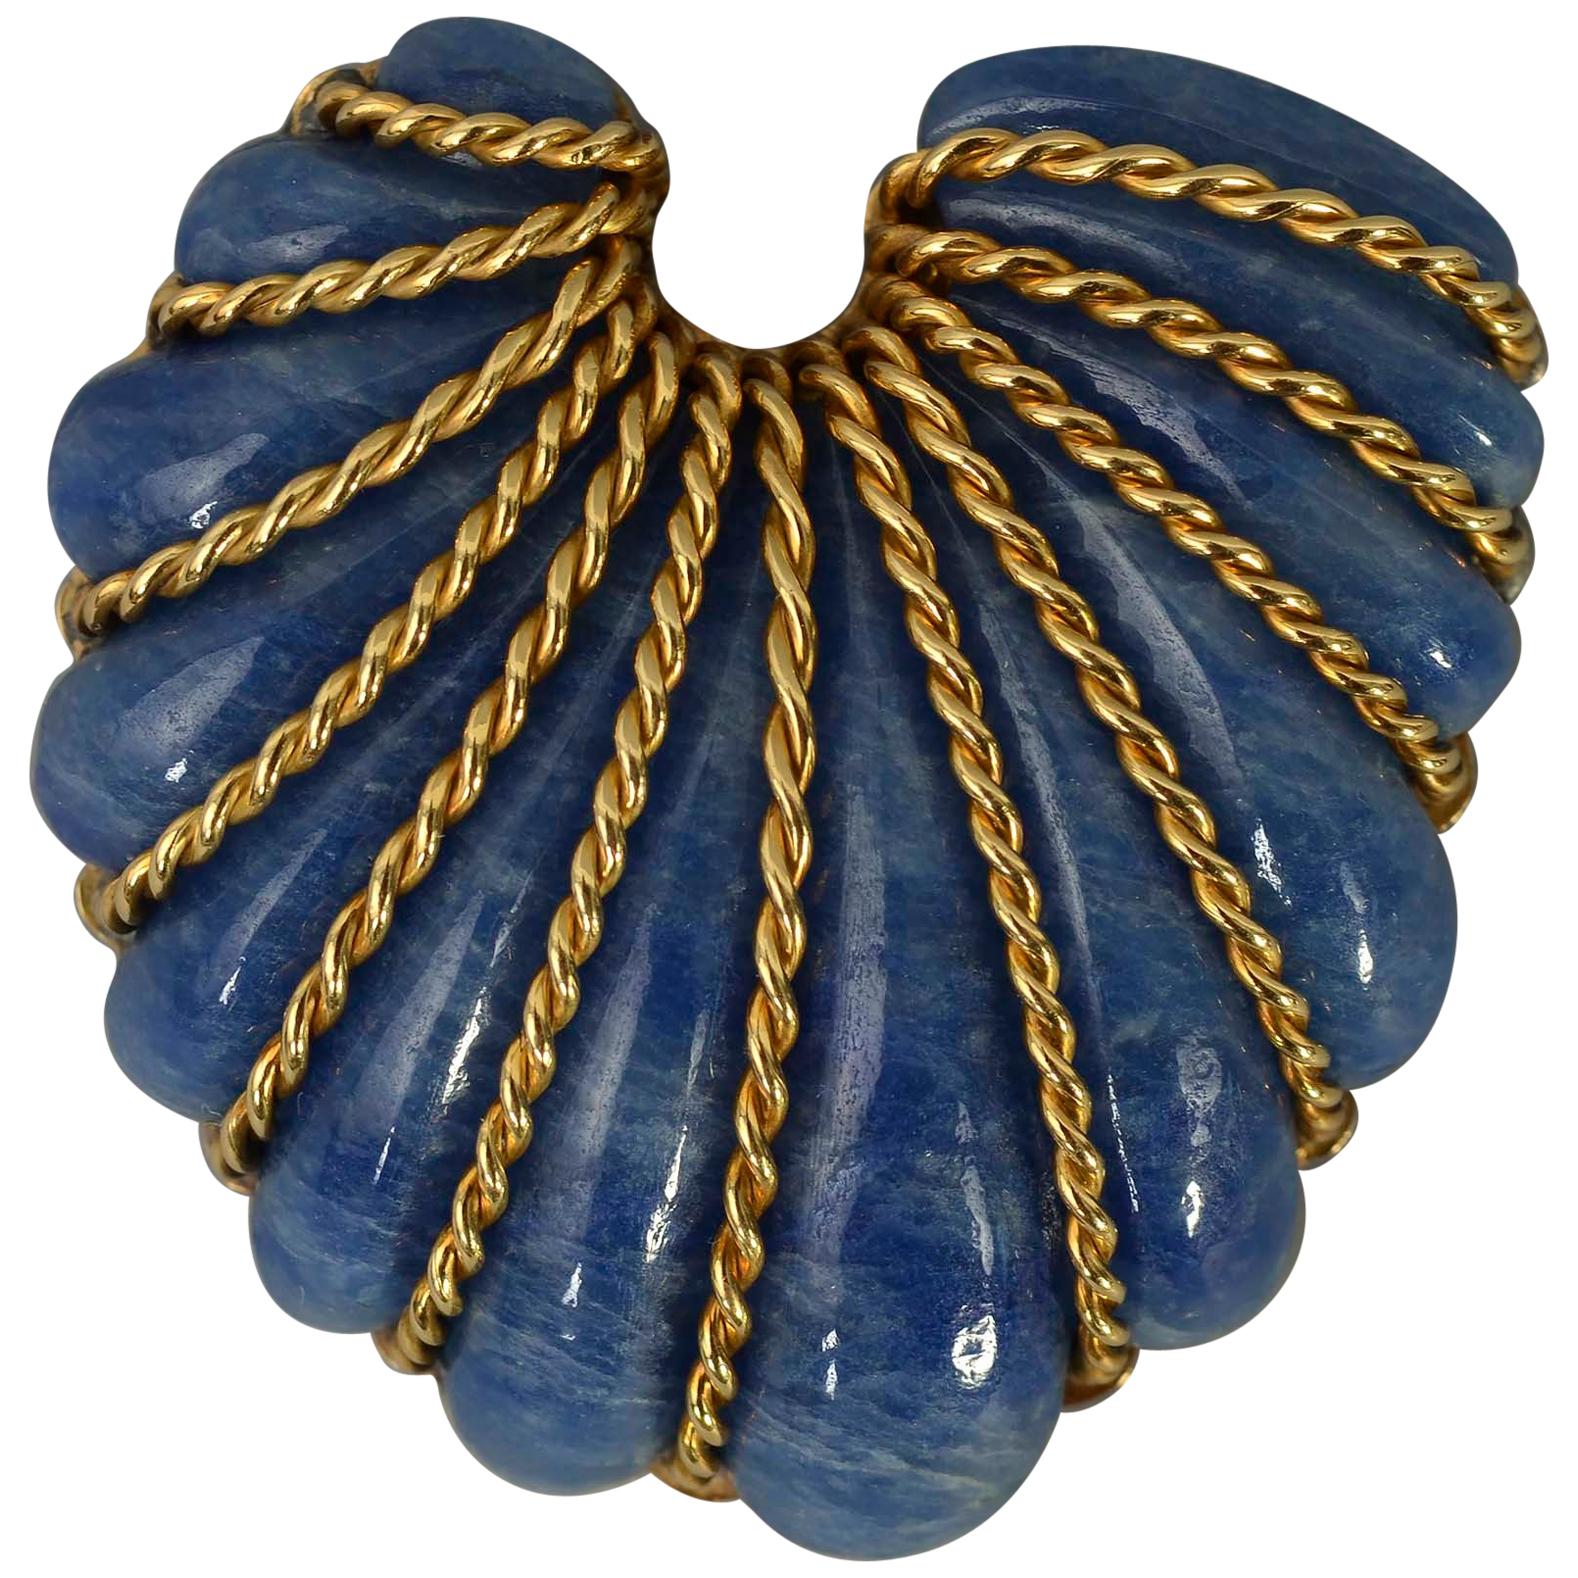 Seaman Schepps Gold and Sodalite Carved Shell Brooch